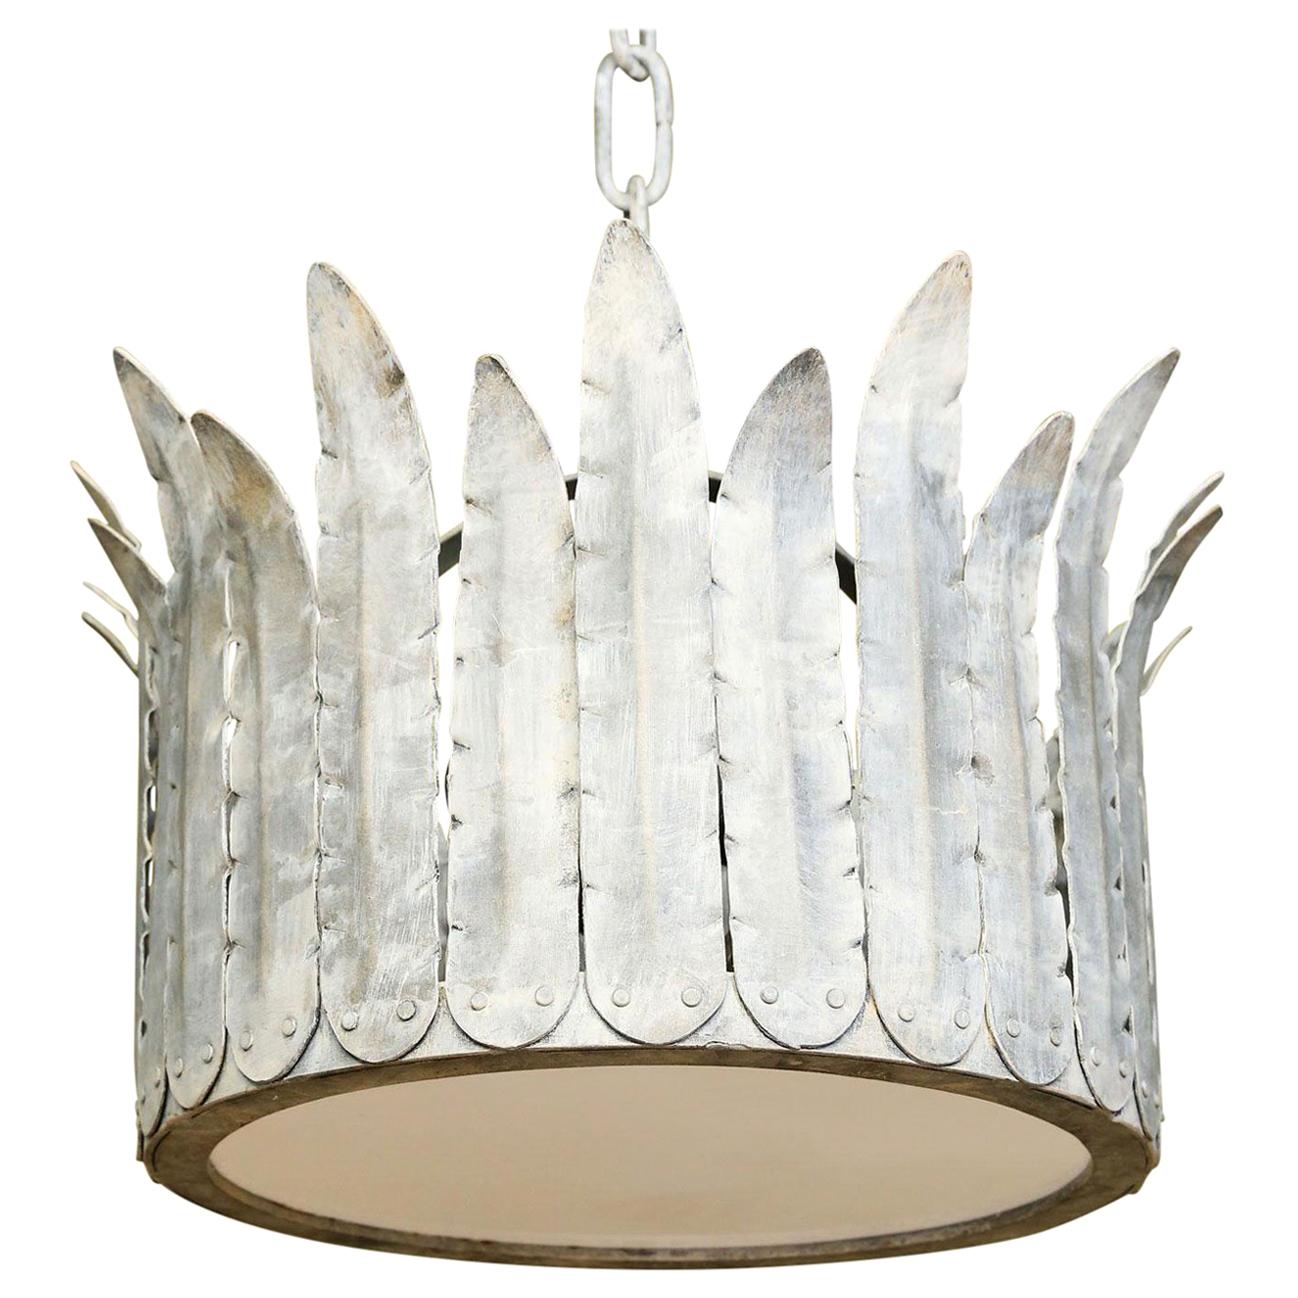 Handcrafted Iron "Fairfield" Crown Light in Silver